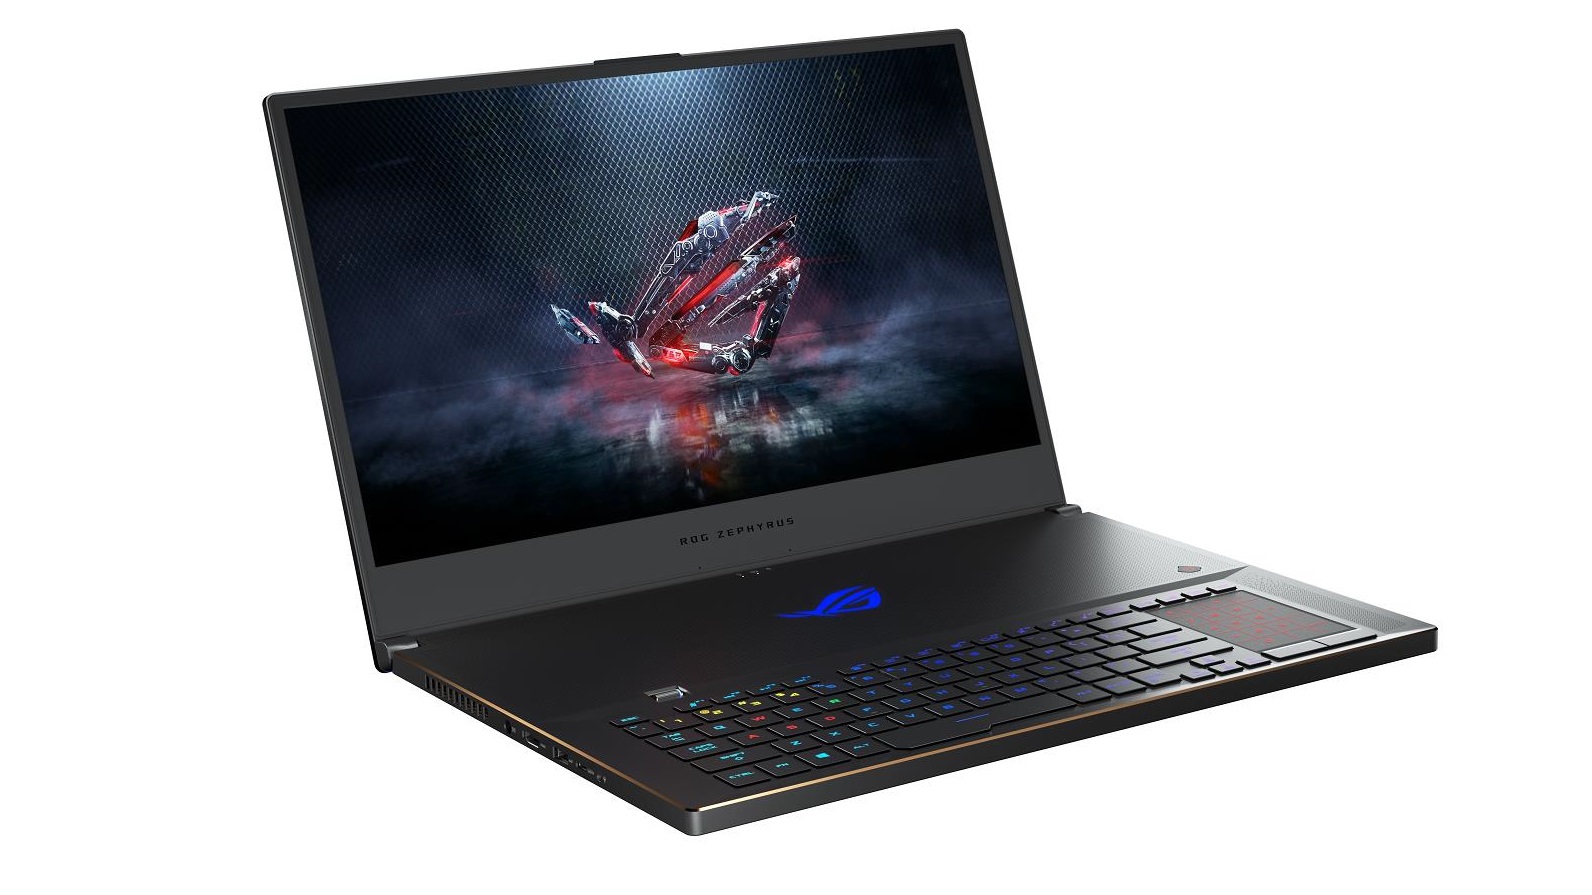 Asus Announces Rog Zephyrus S Gx701 Ultra Thin Gaming Laptop